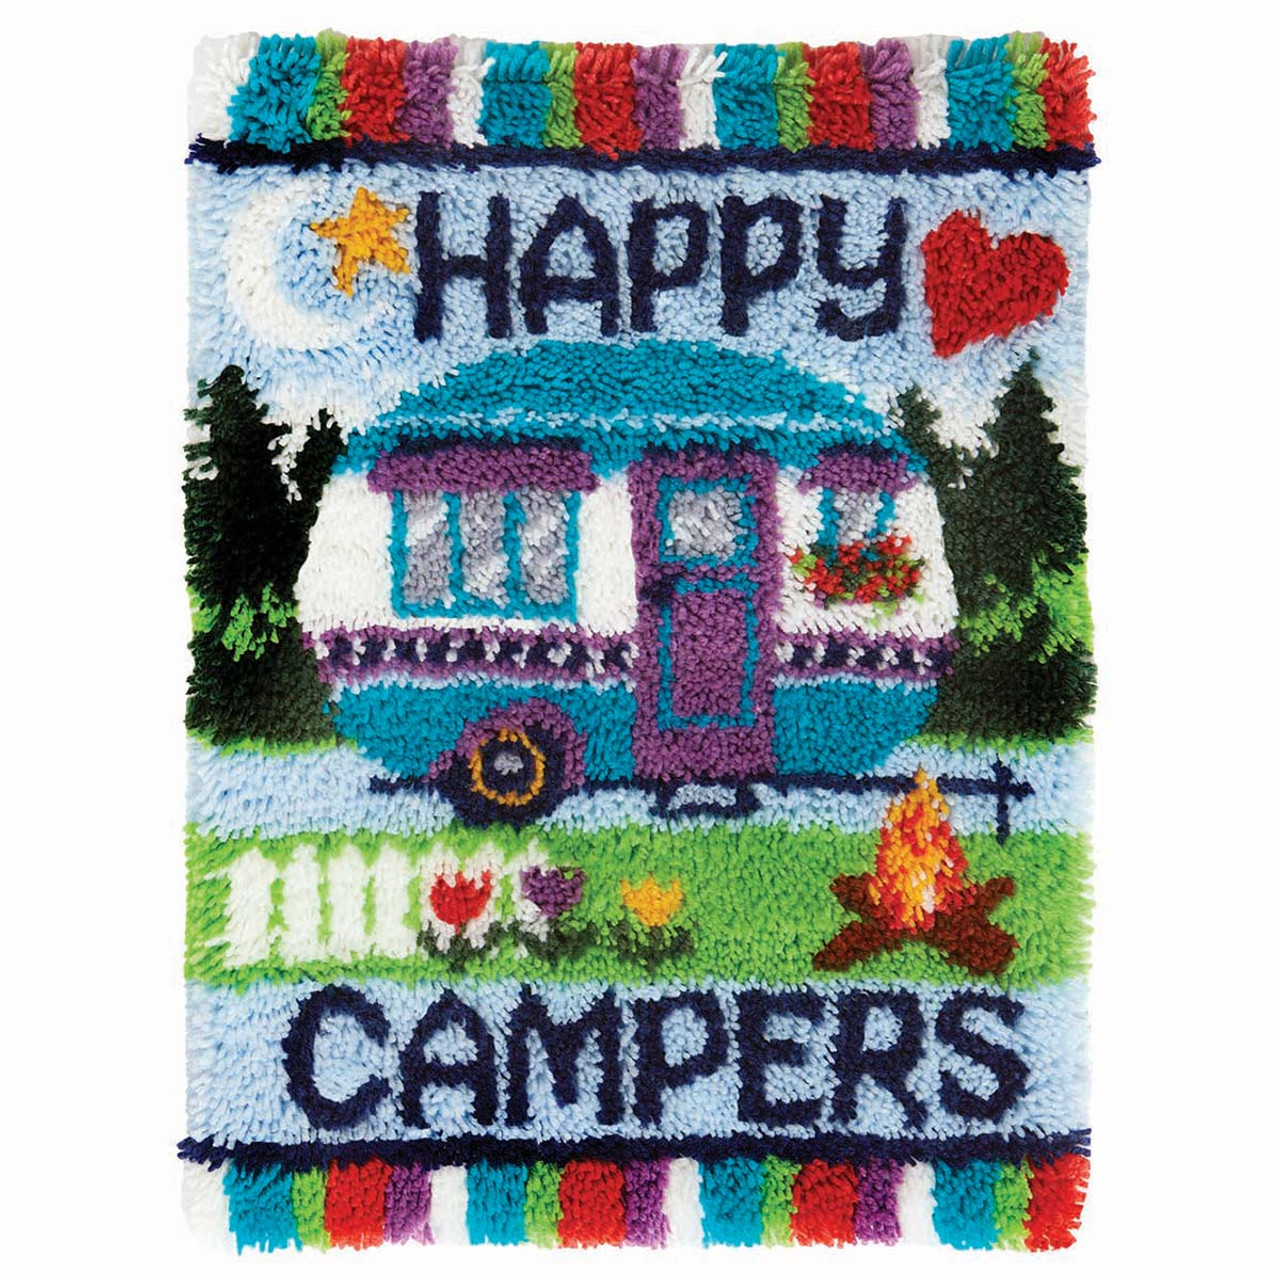 Cross Stitch Christmas Stockings - The Camp Site - Your Camping Resource